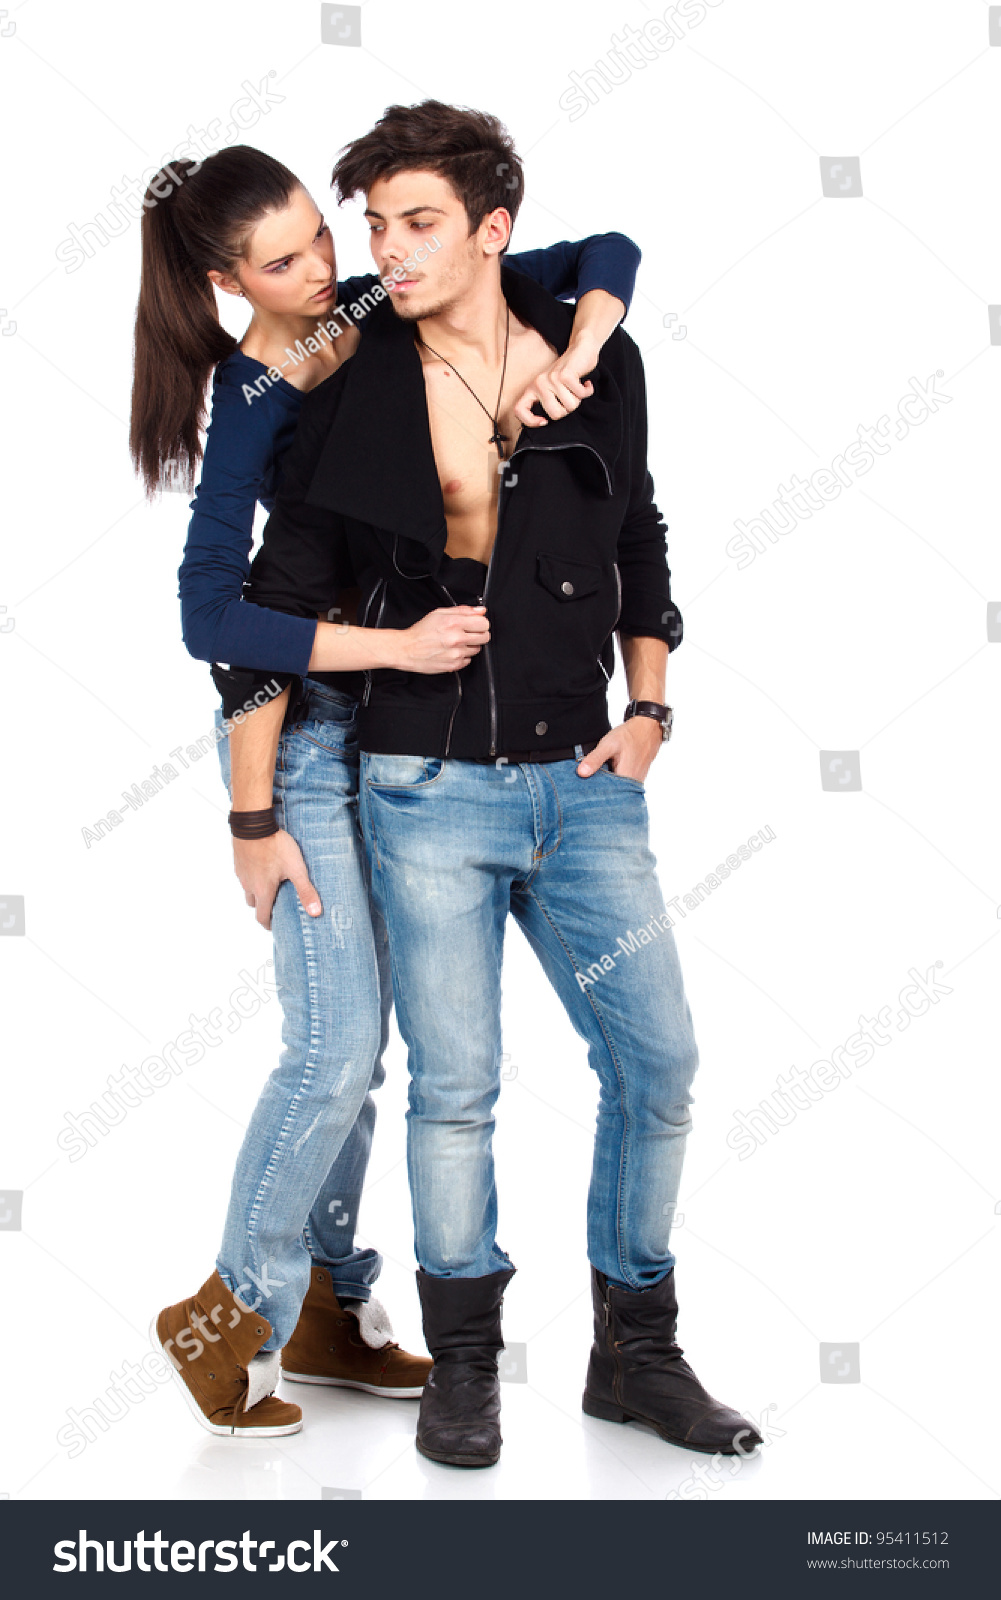 Sensual Couple Attractive Young Woman photo